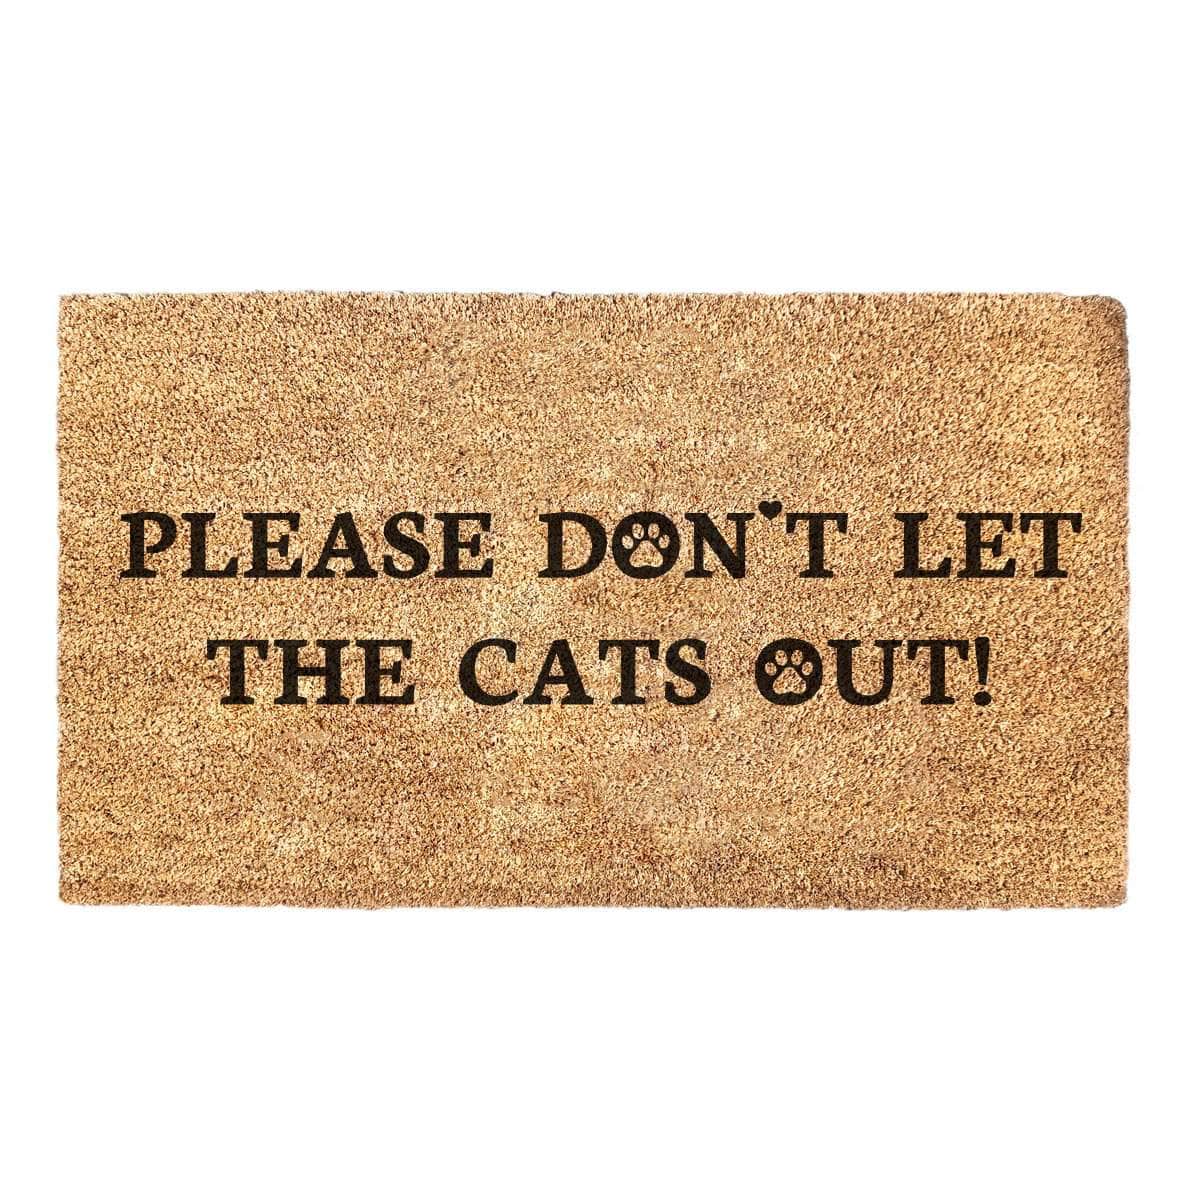 Please Don't Let The Cats Out! - Doormat